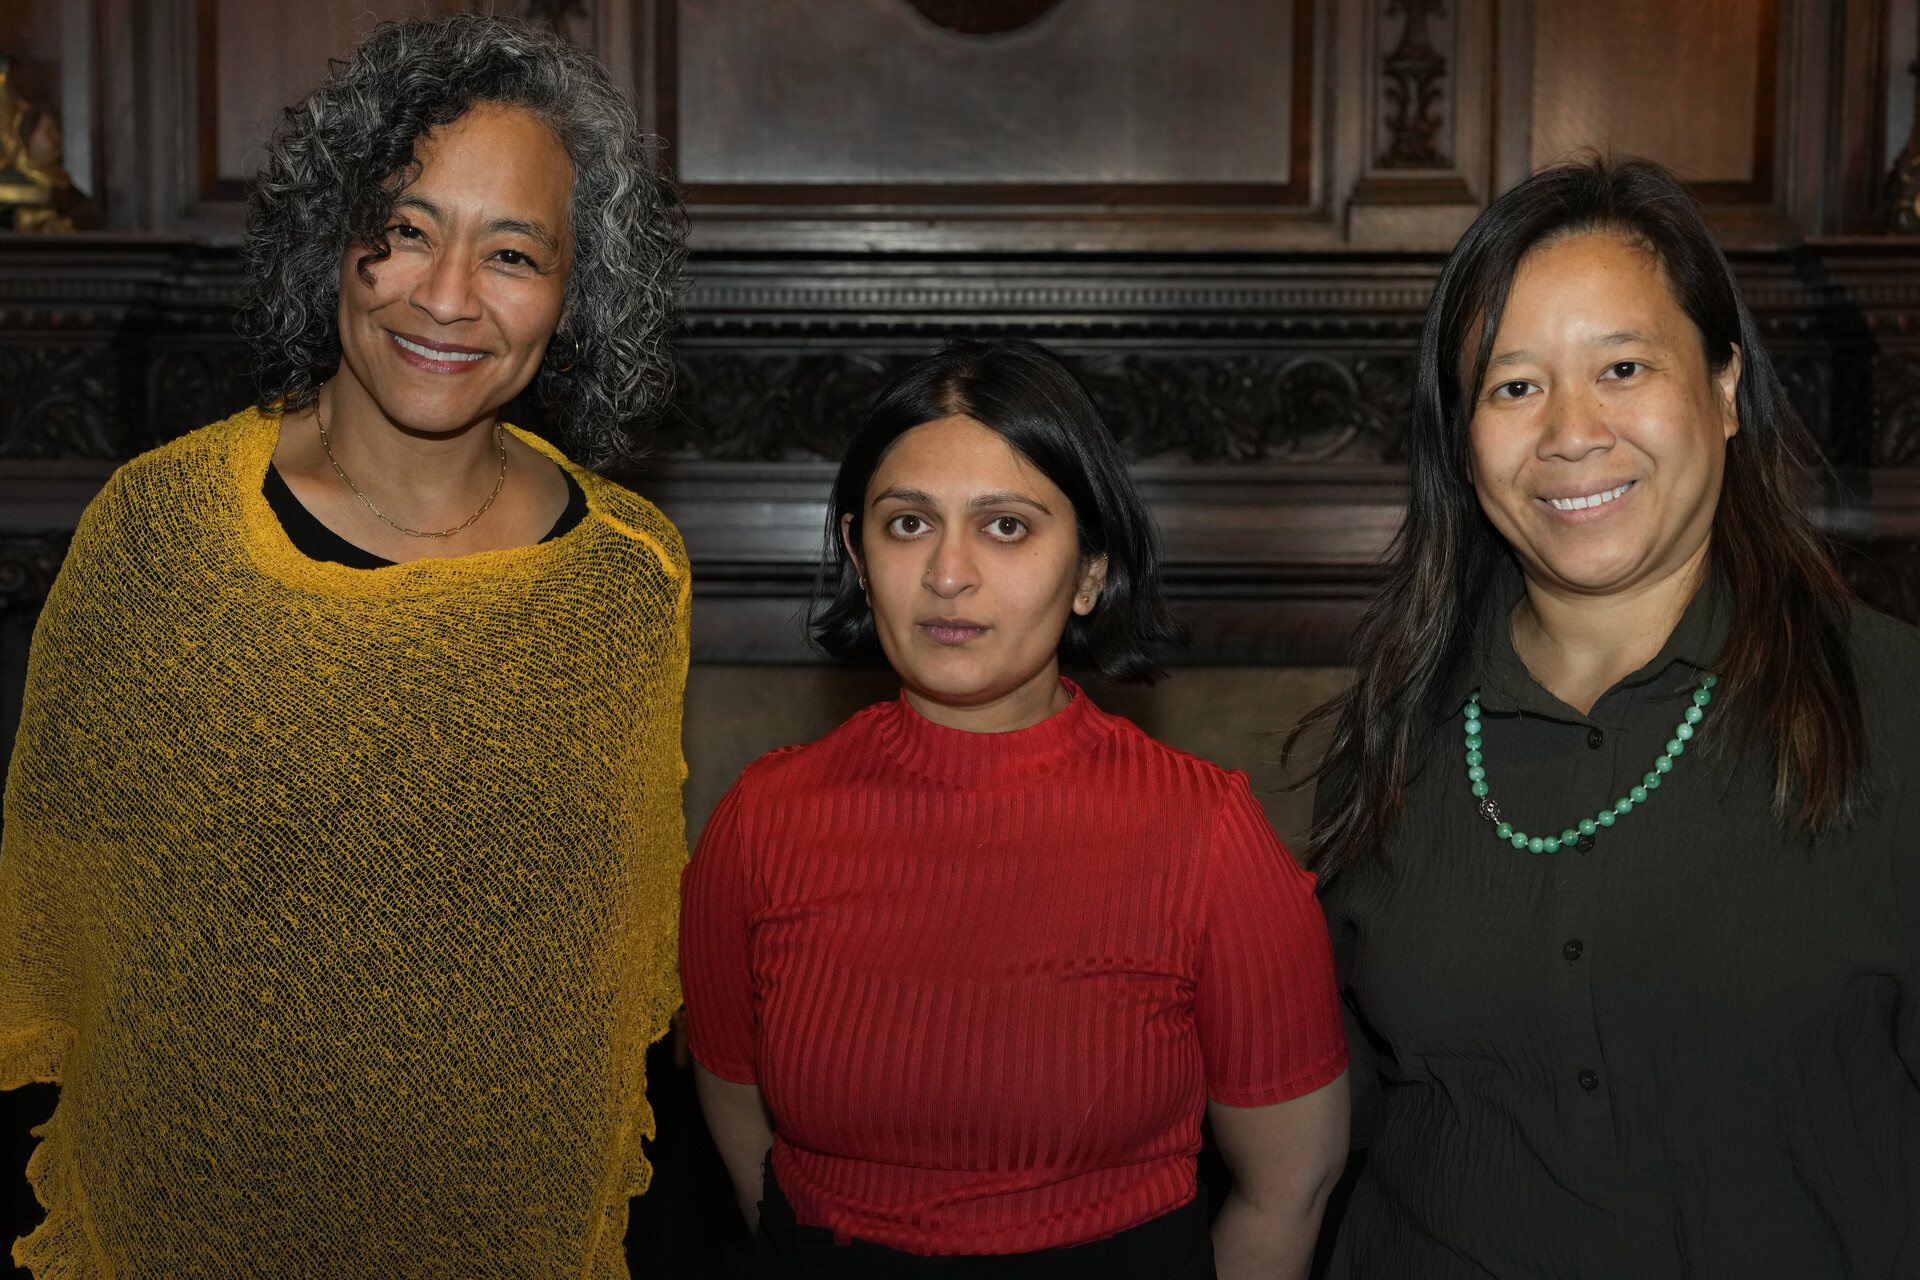 President L. Song Richardson, newly-tenured faculty member Pallavi Sriram, and Dean Emily Chan at a celebratory dinner on April 11 at Stewart House.  Photo by Jamie Cotten / Colorado College